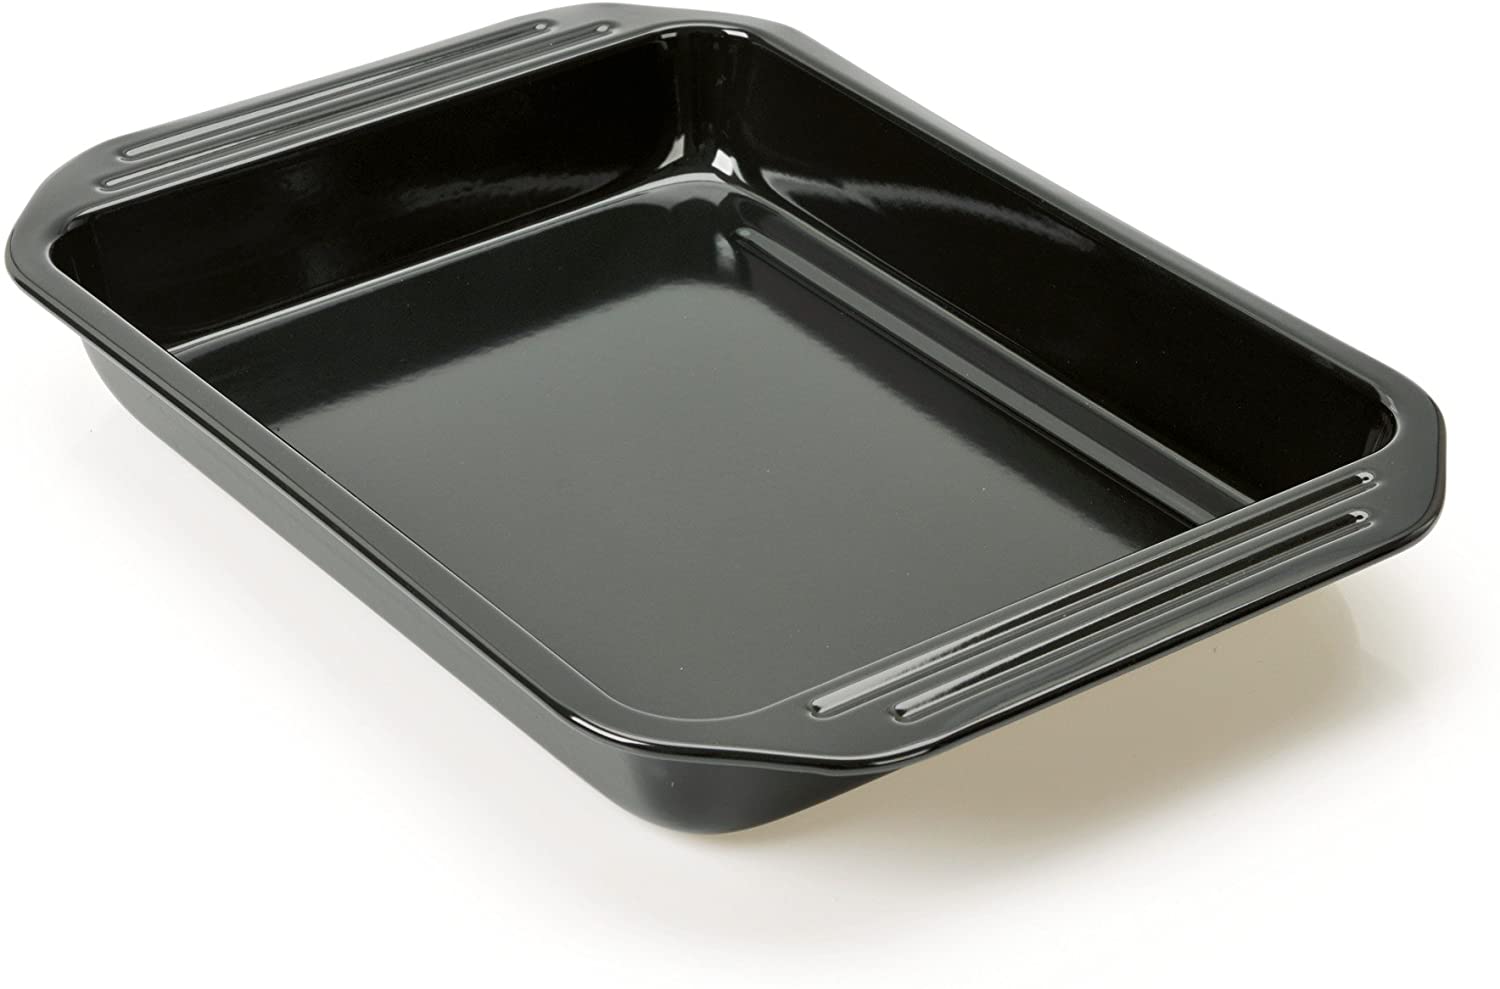 Kaiser Cuisine Line 635026 Grill and Baking Tray with Handles 39.5 x 28 x 5 cm